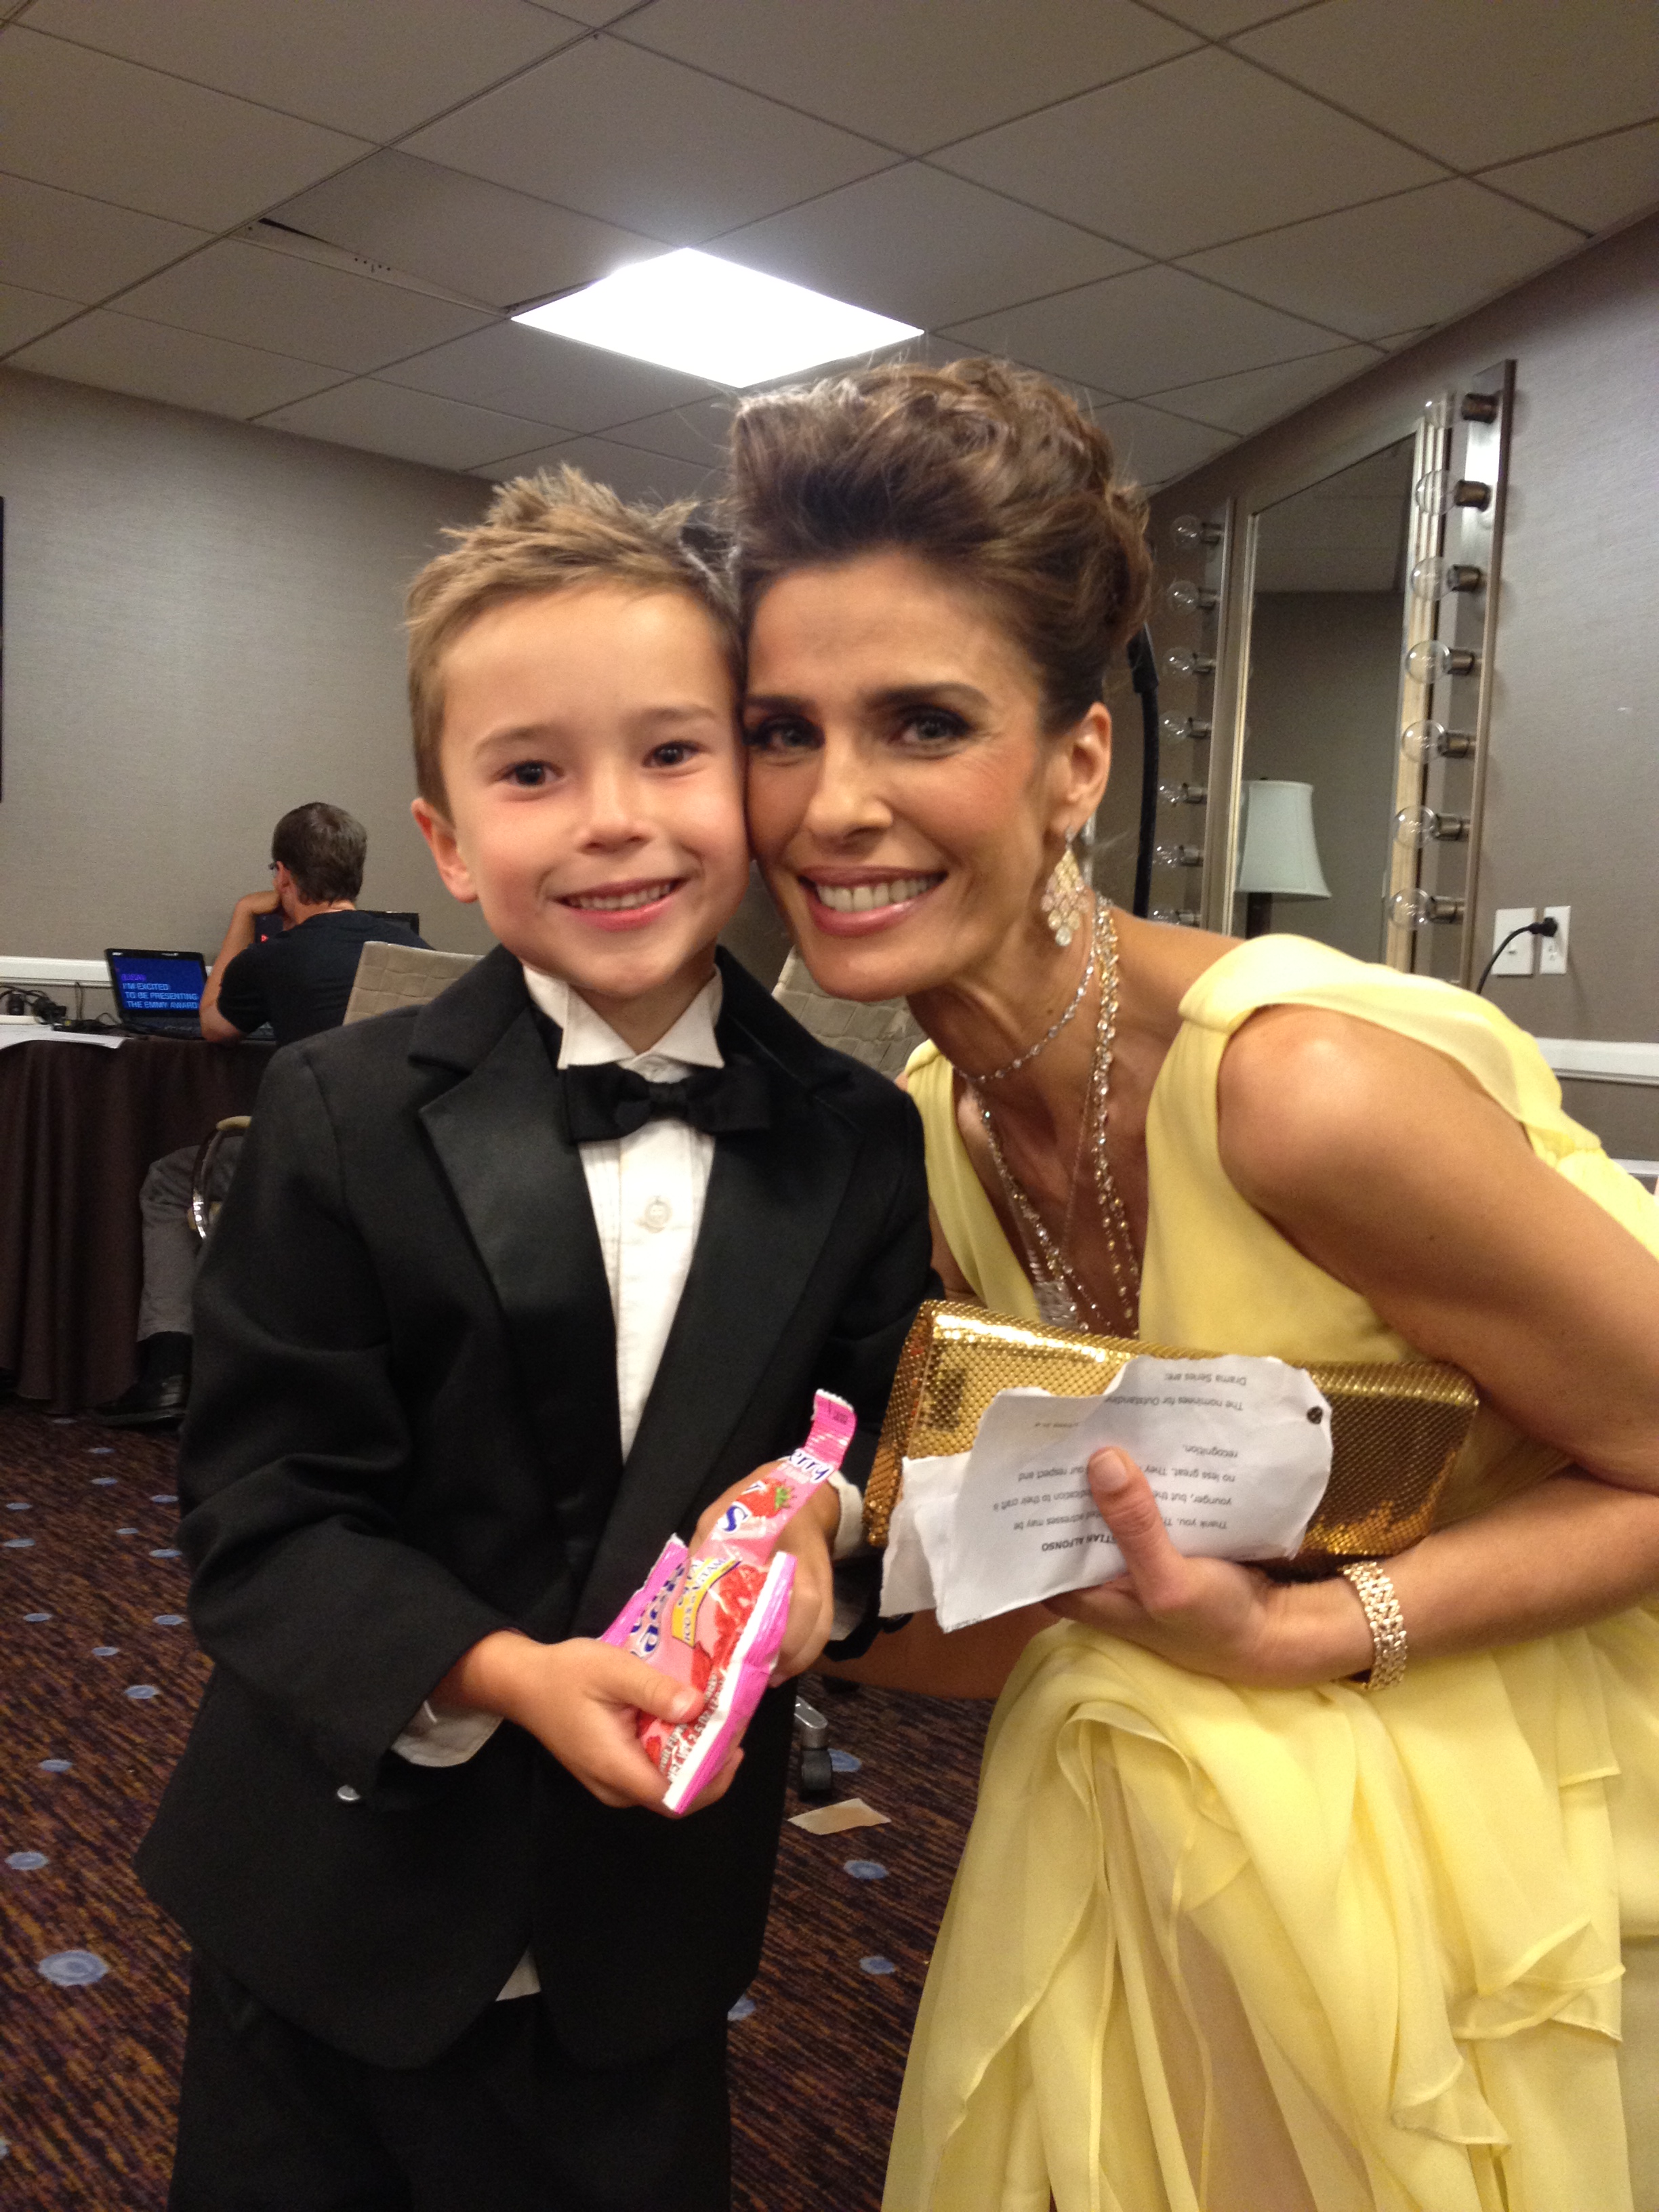 With Kristian Alfonso of Days of Our Lives at the Daytime Emmy Awards